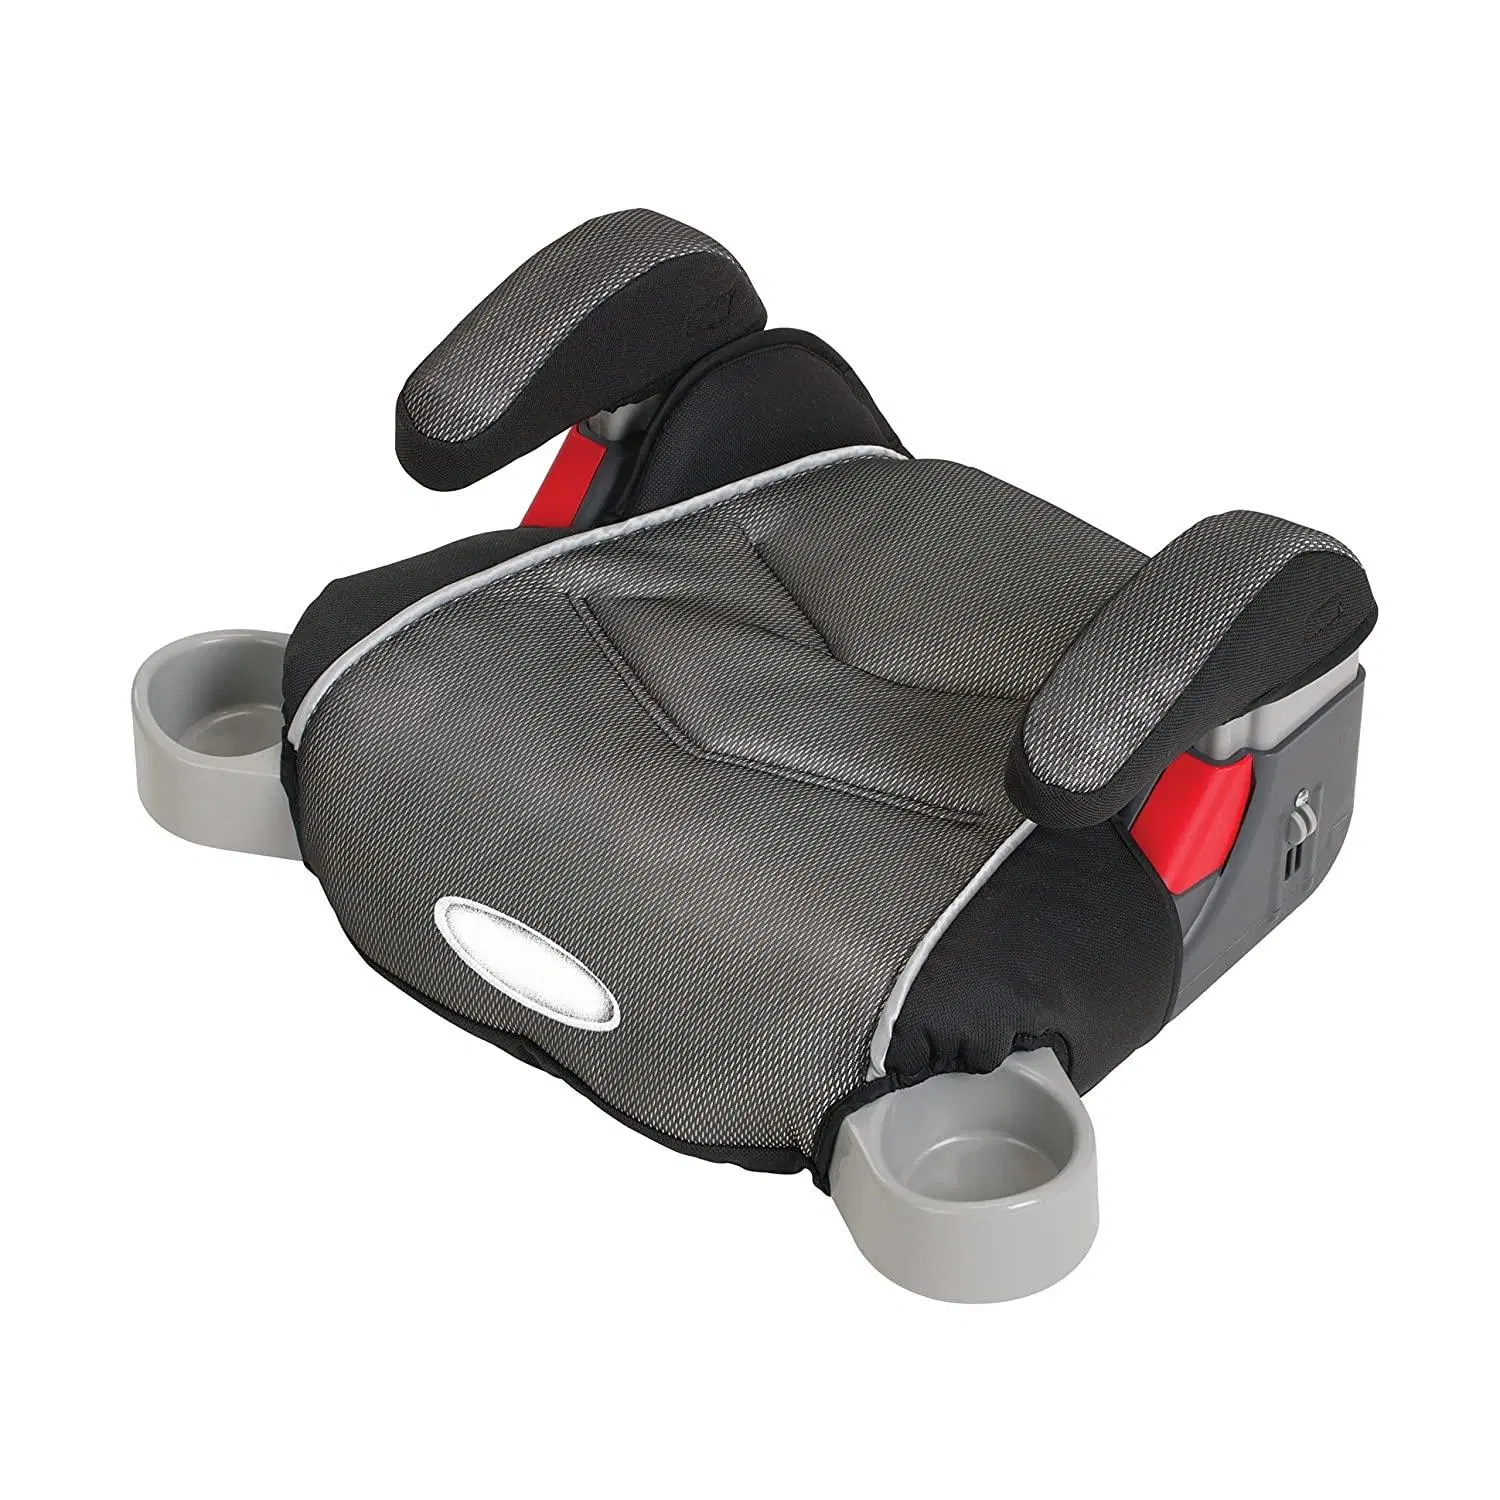 Turbobooster Car Seat with Movable Cup Holder